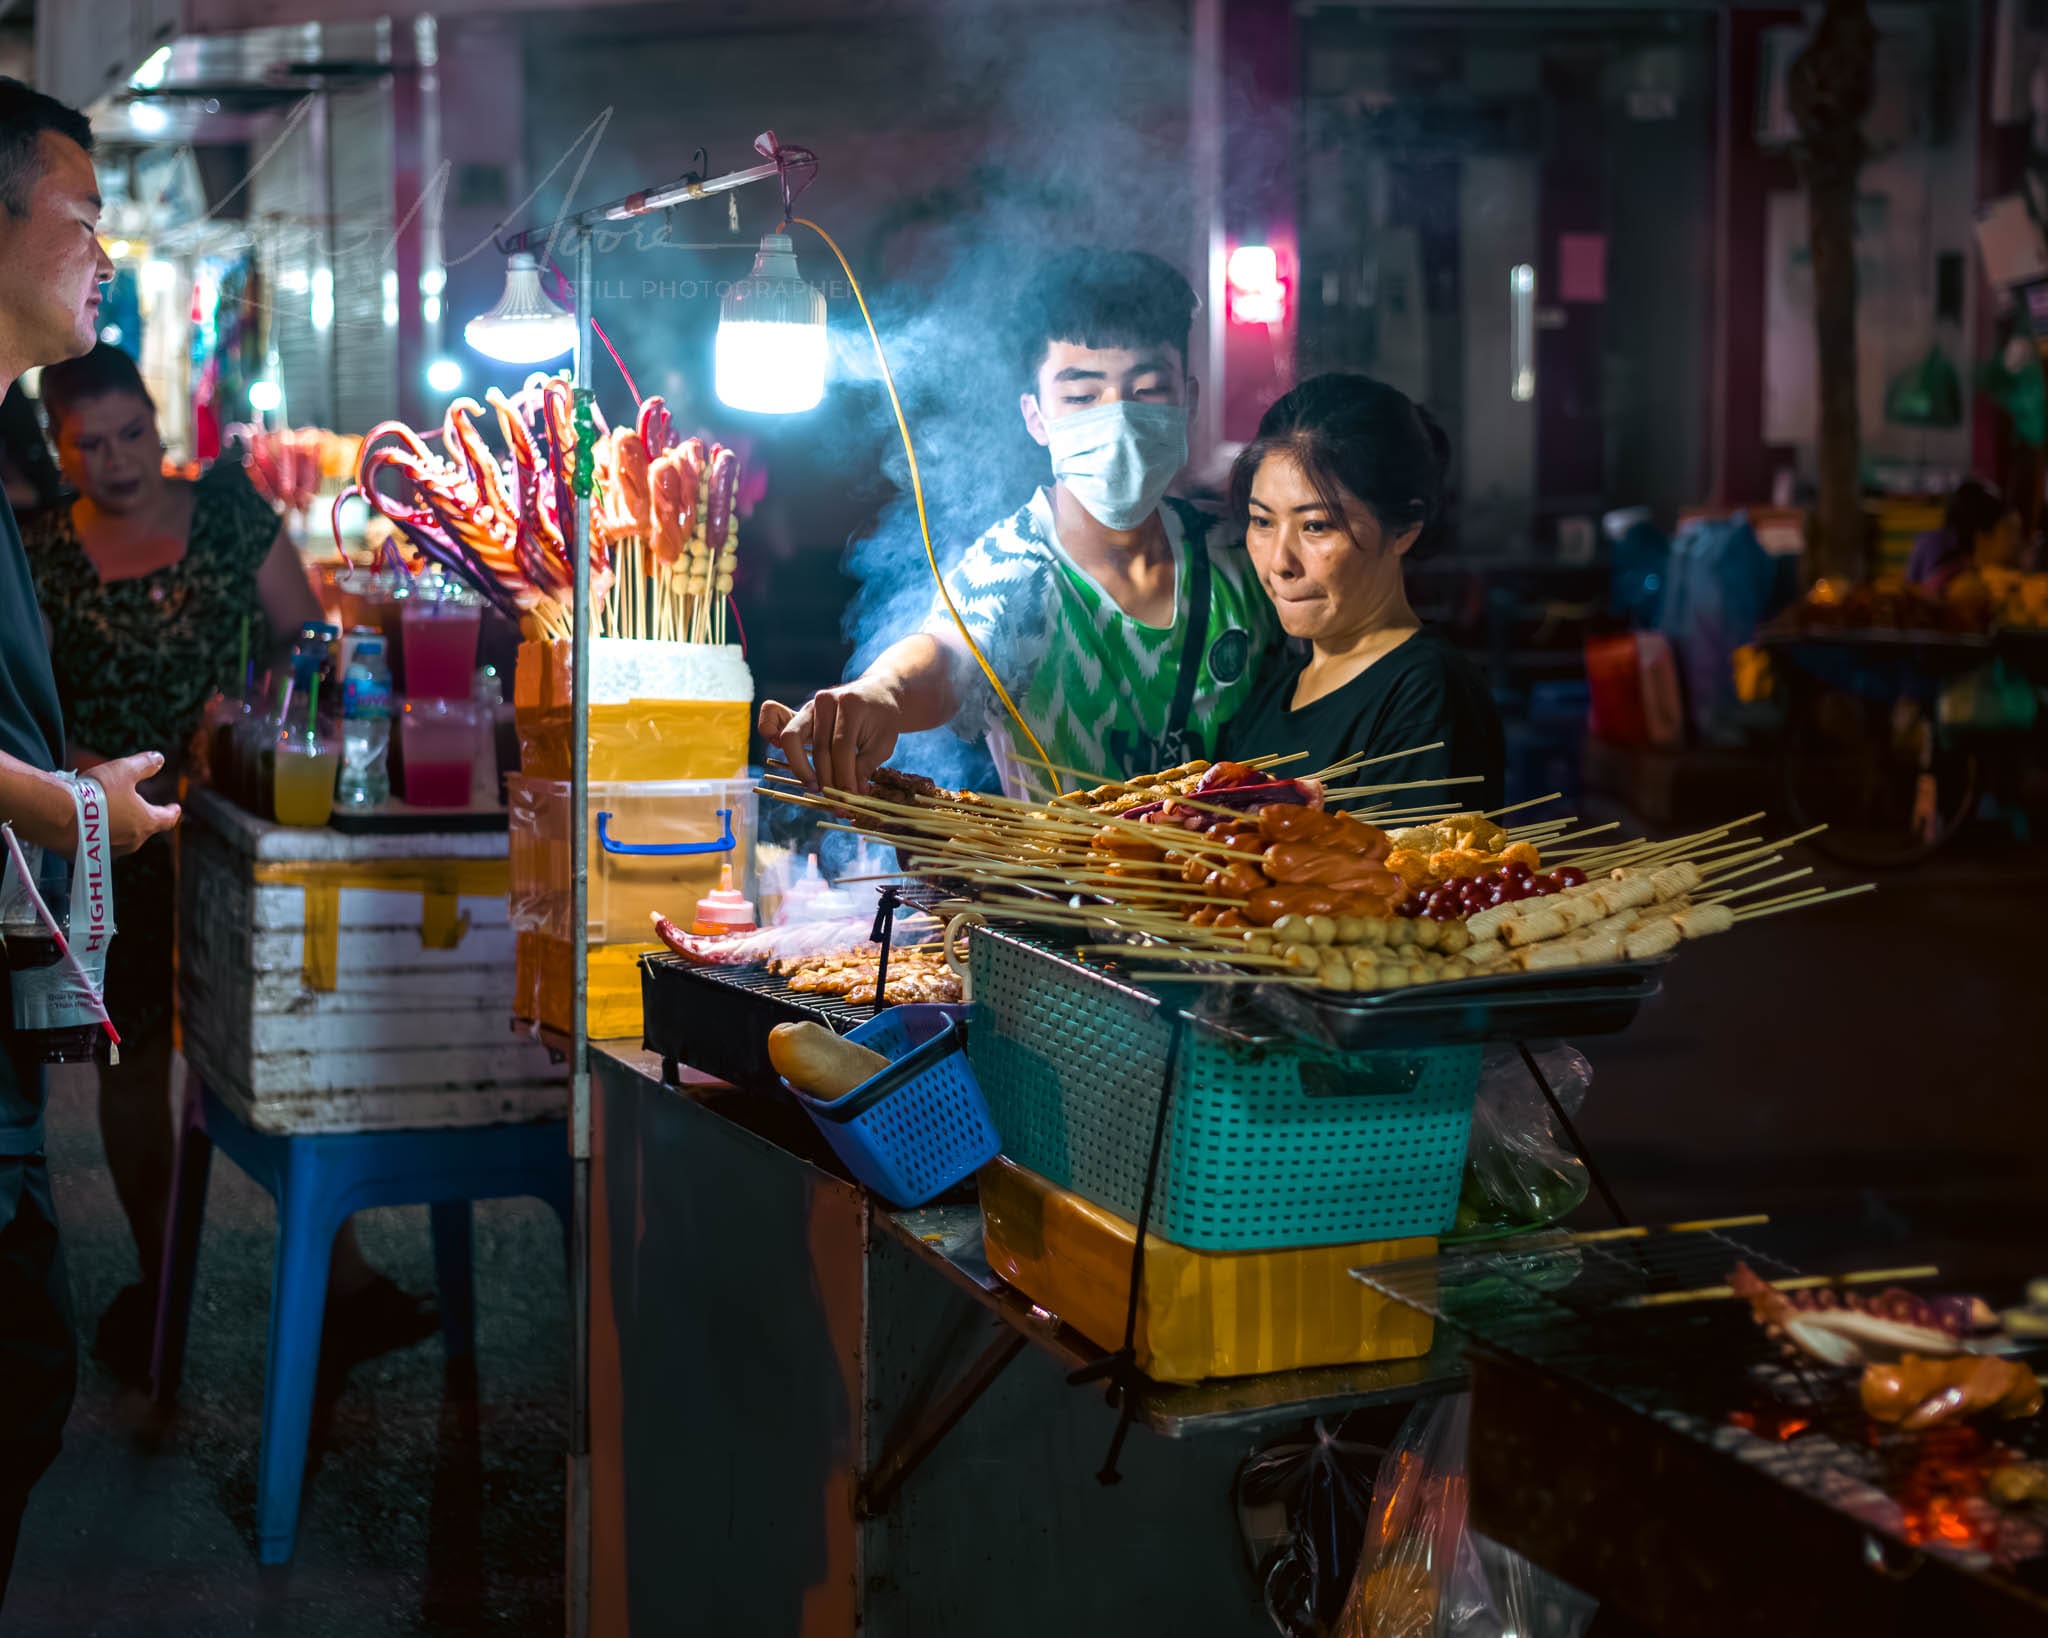 Bustling Hanoi night market food stall with skewered treats and attentive vendors.